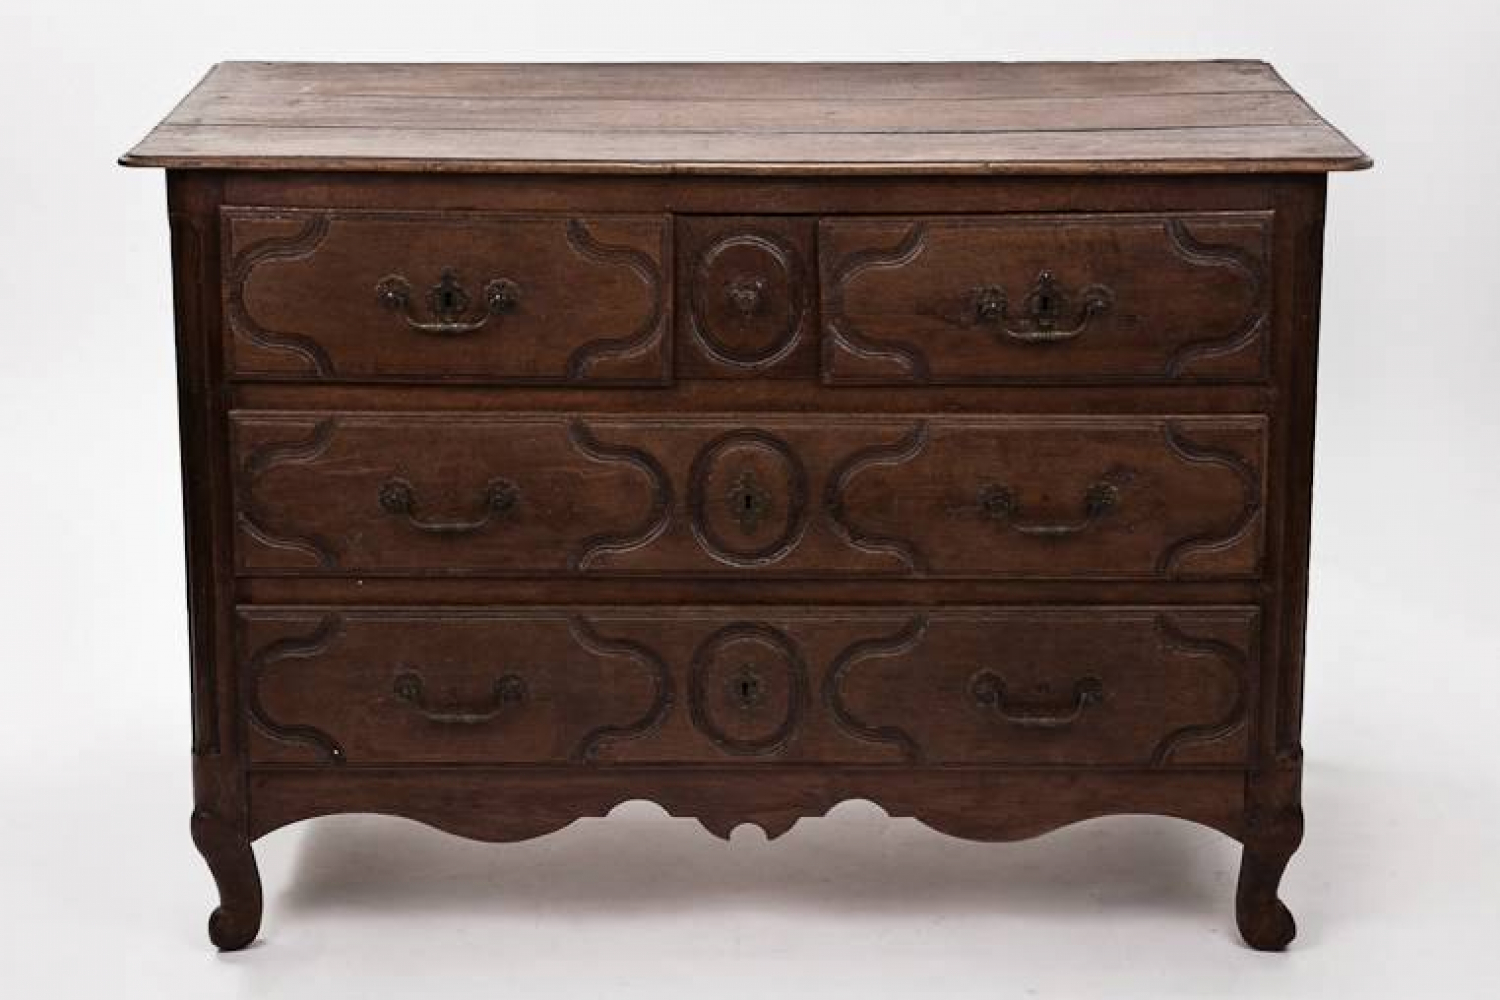 18th century French commode